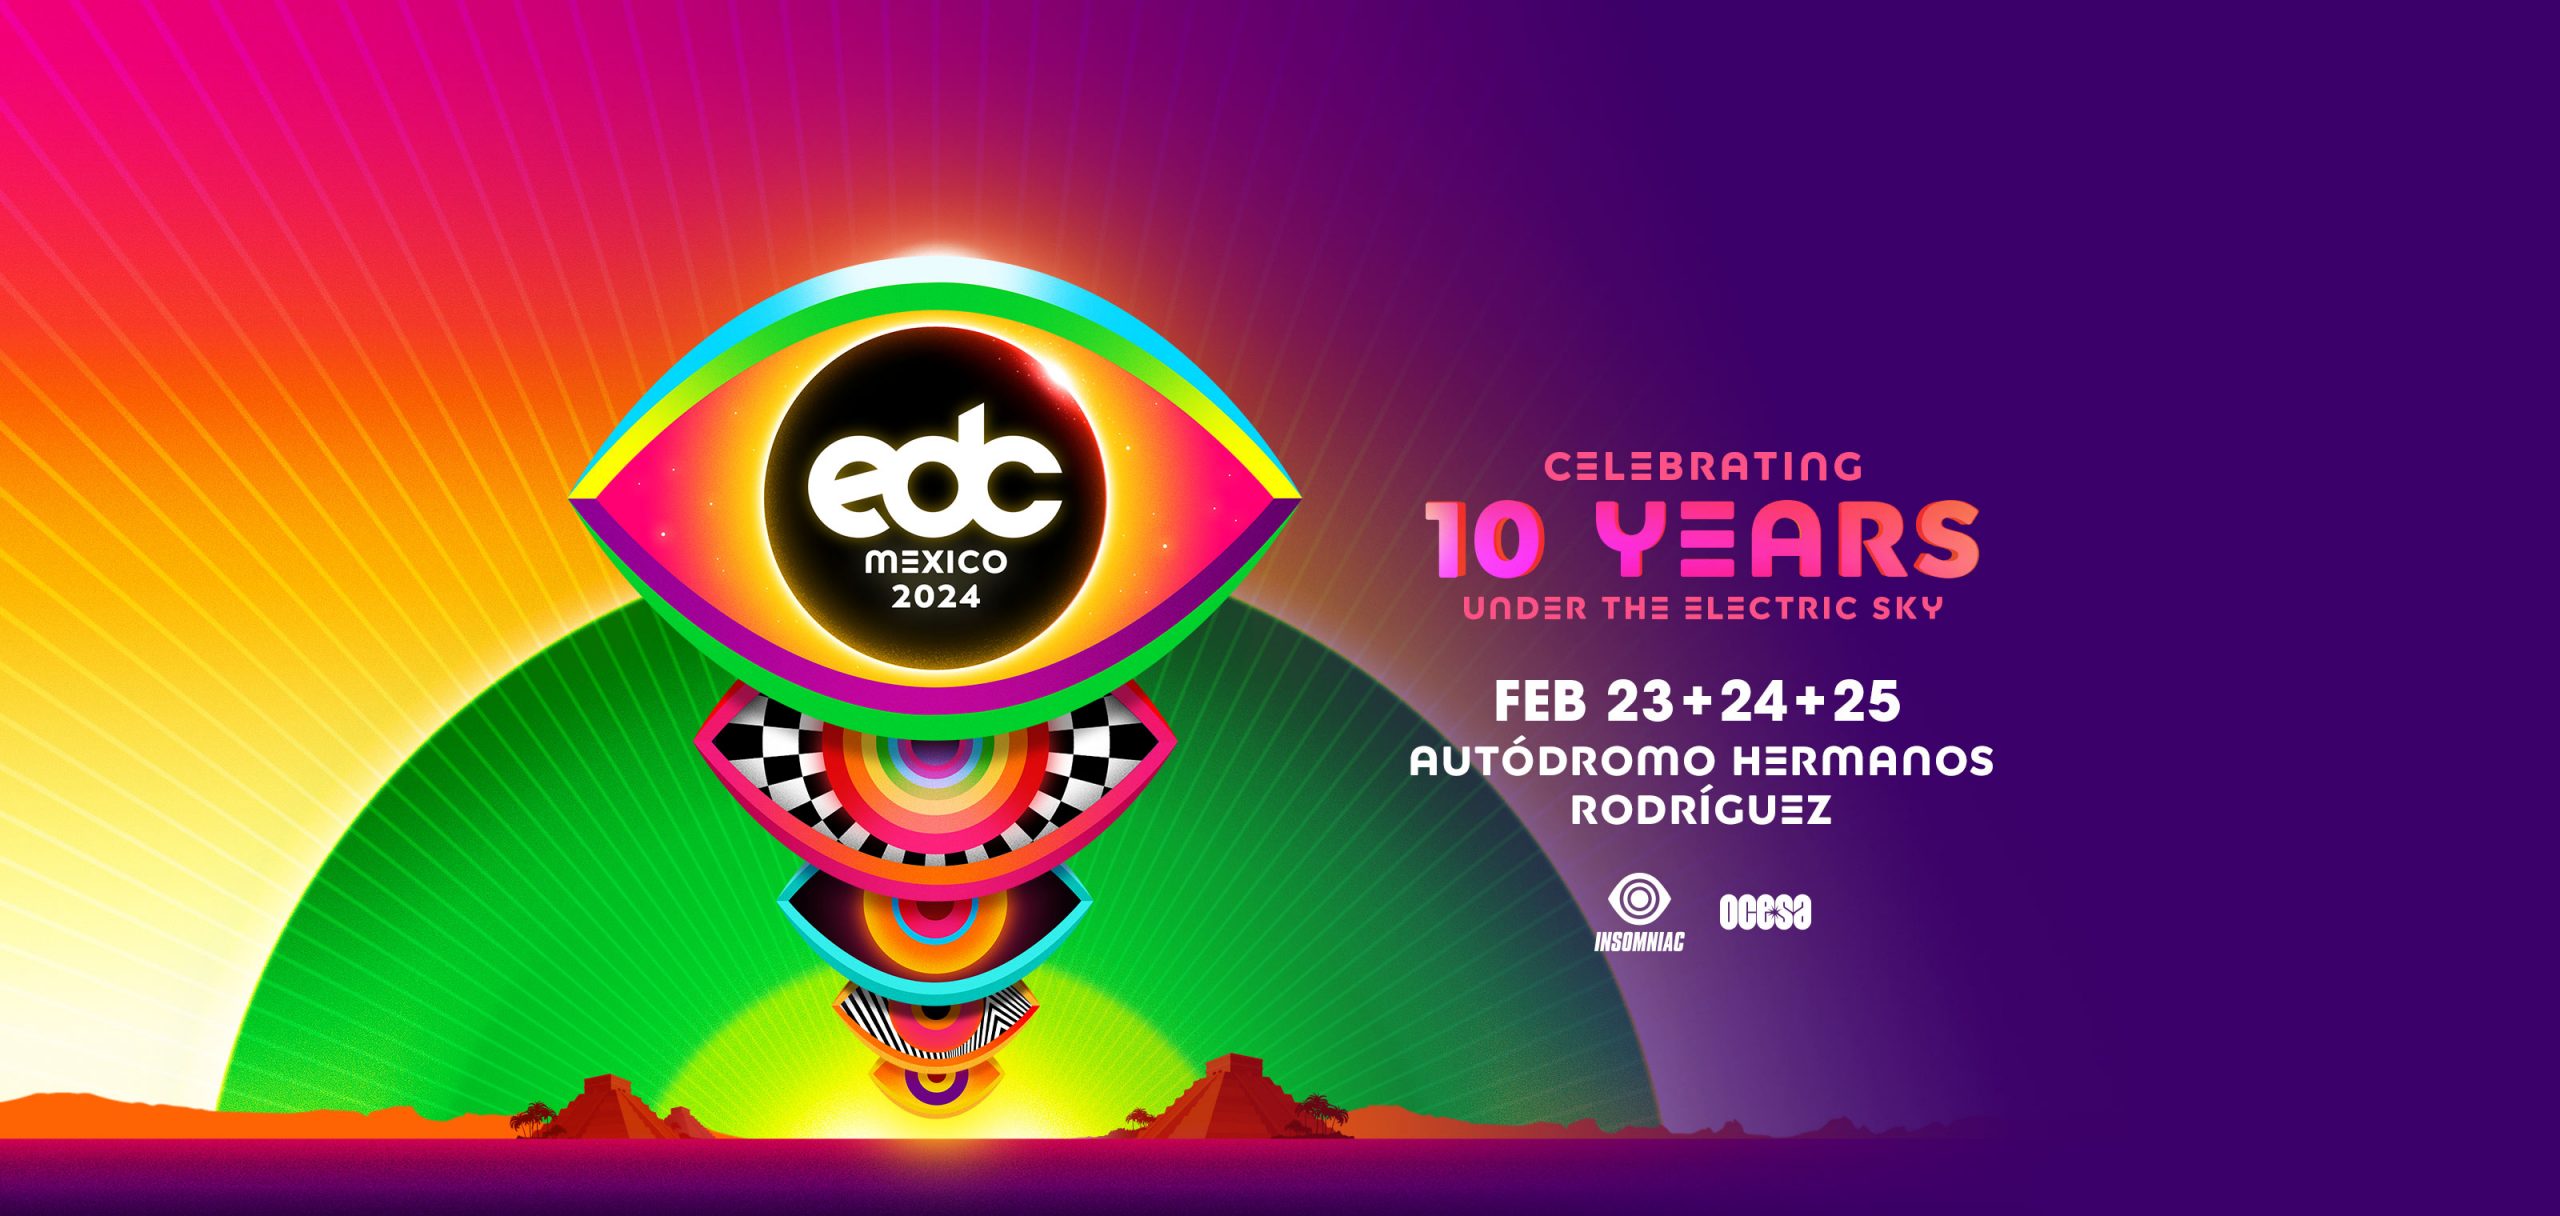 EDC Mexico 2024 Dates and Itineraries